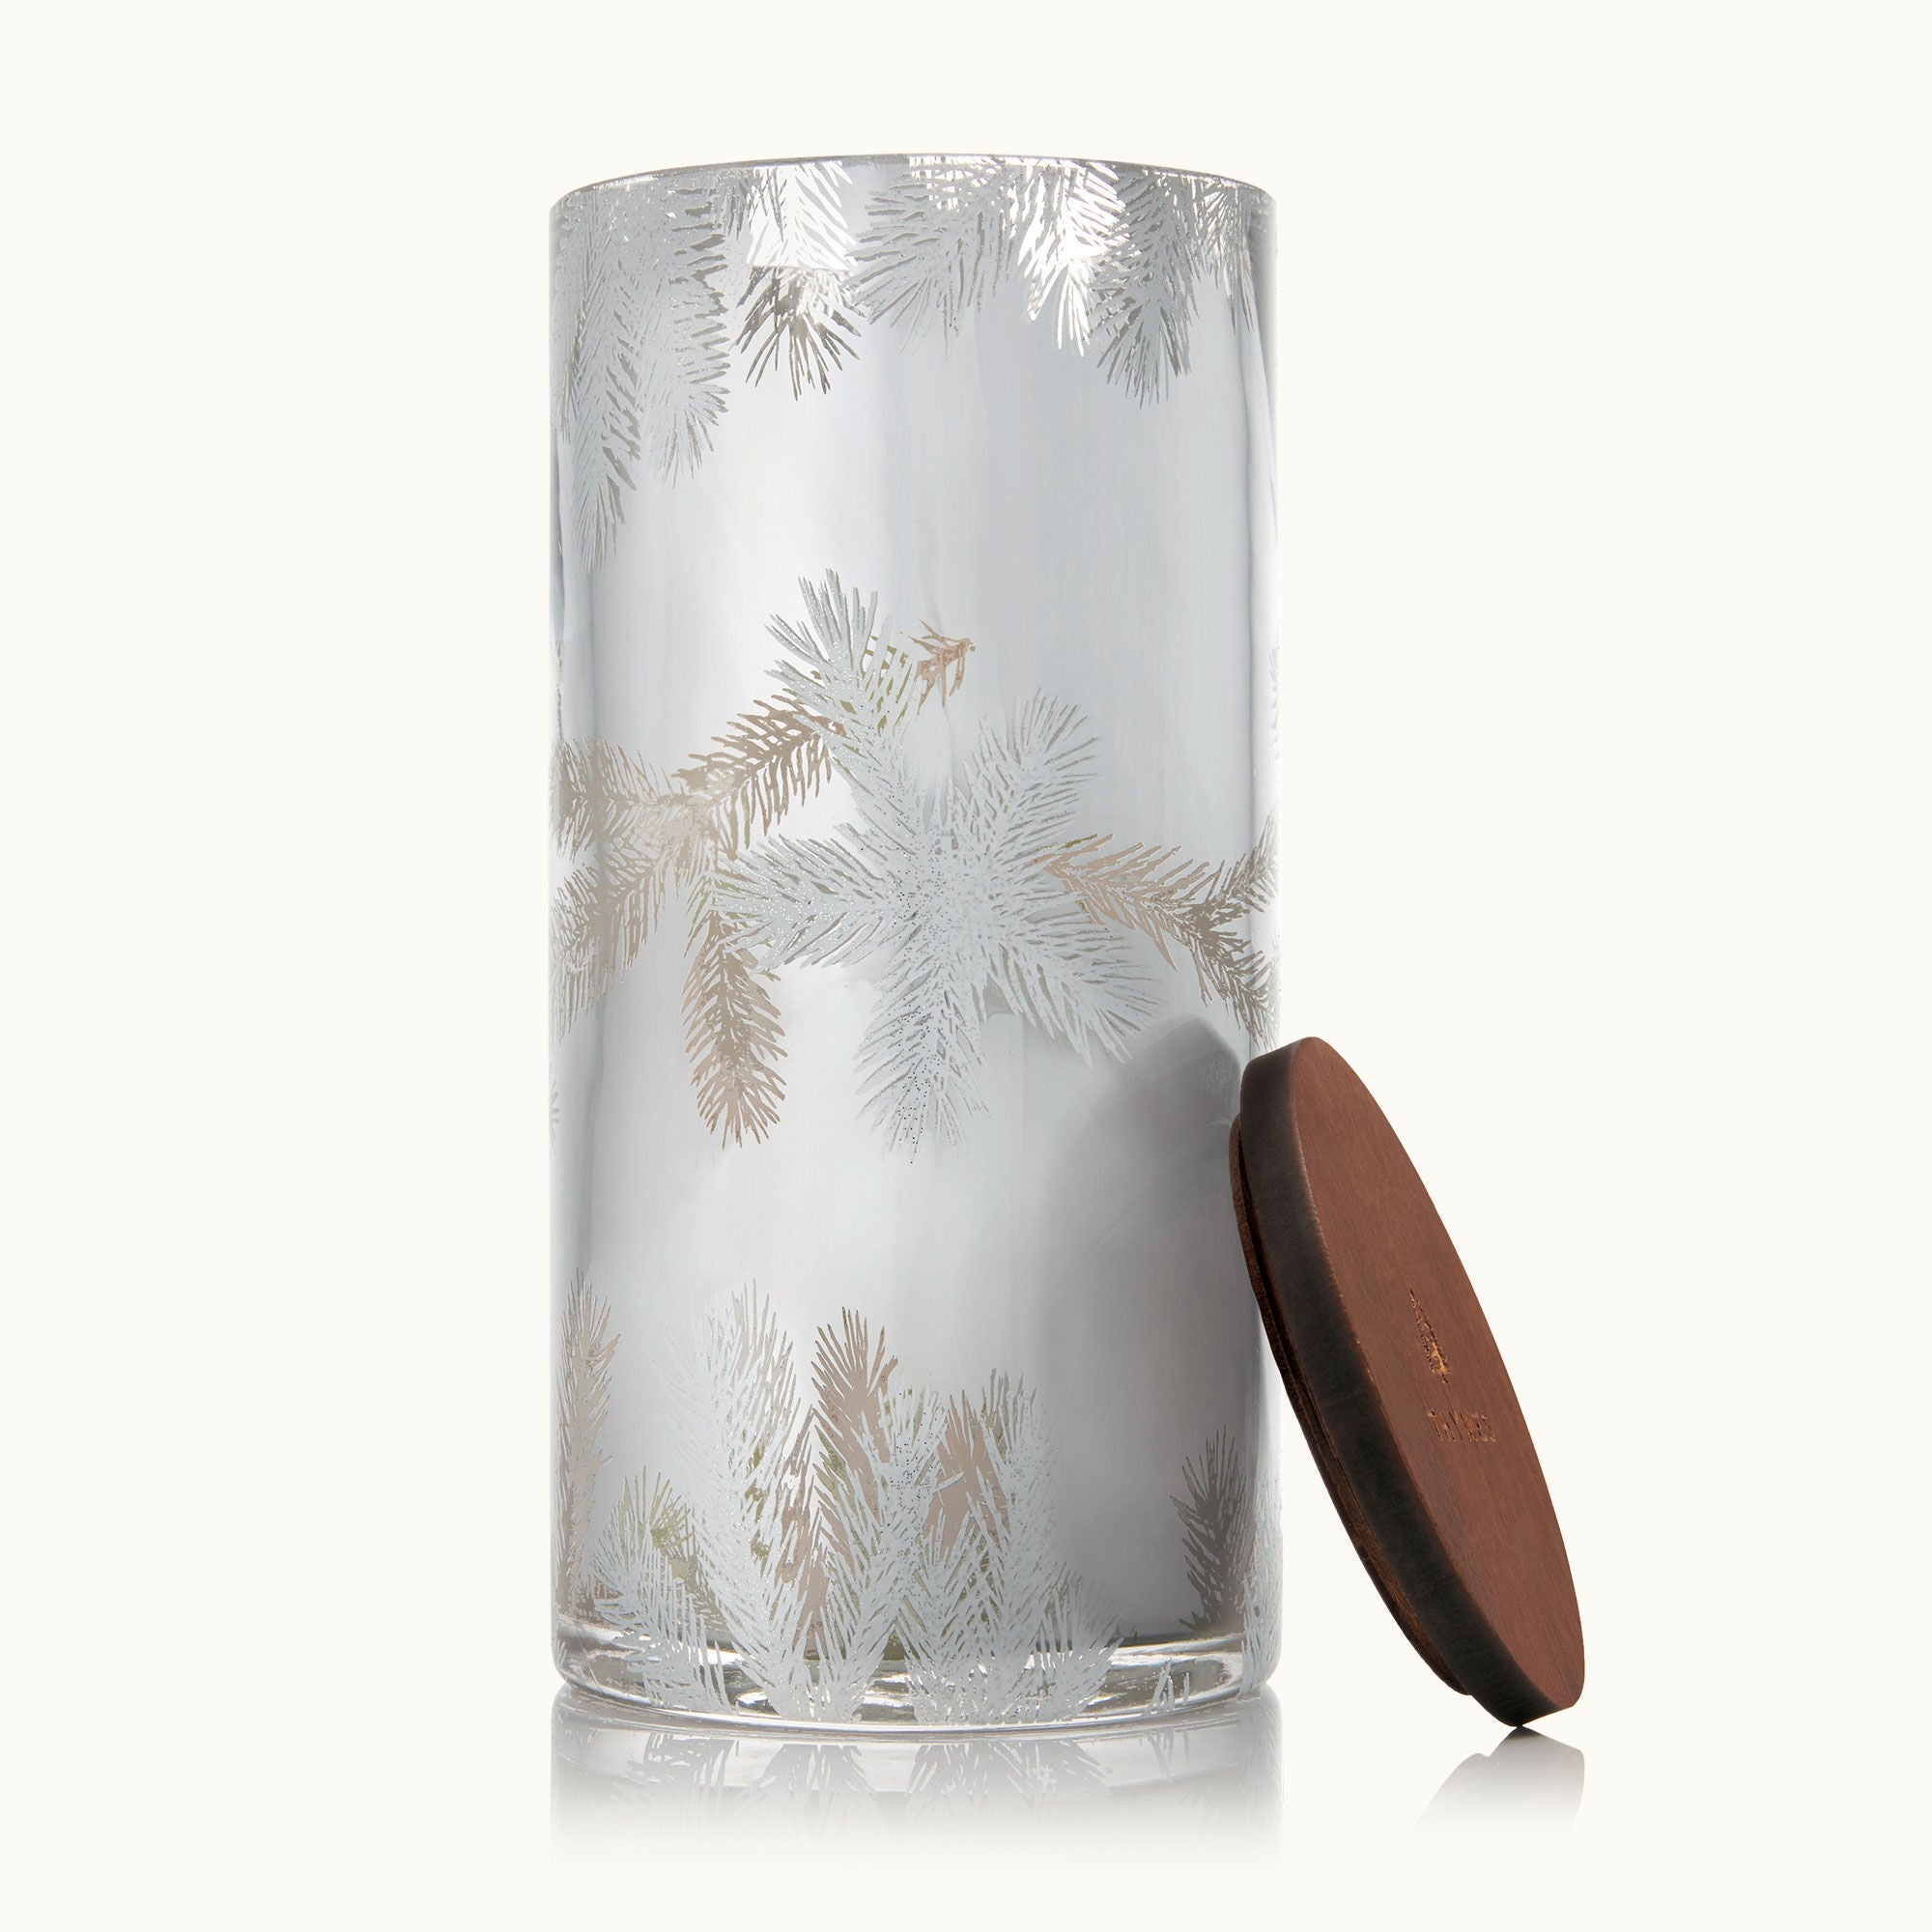 thymes-frasier-fir-statement-large-luminary-candle-0523558007.jpg